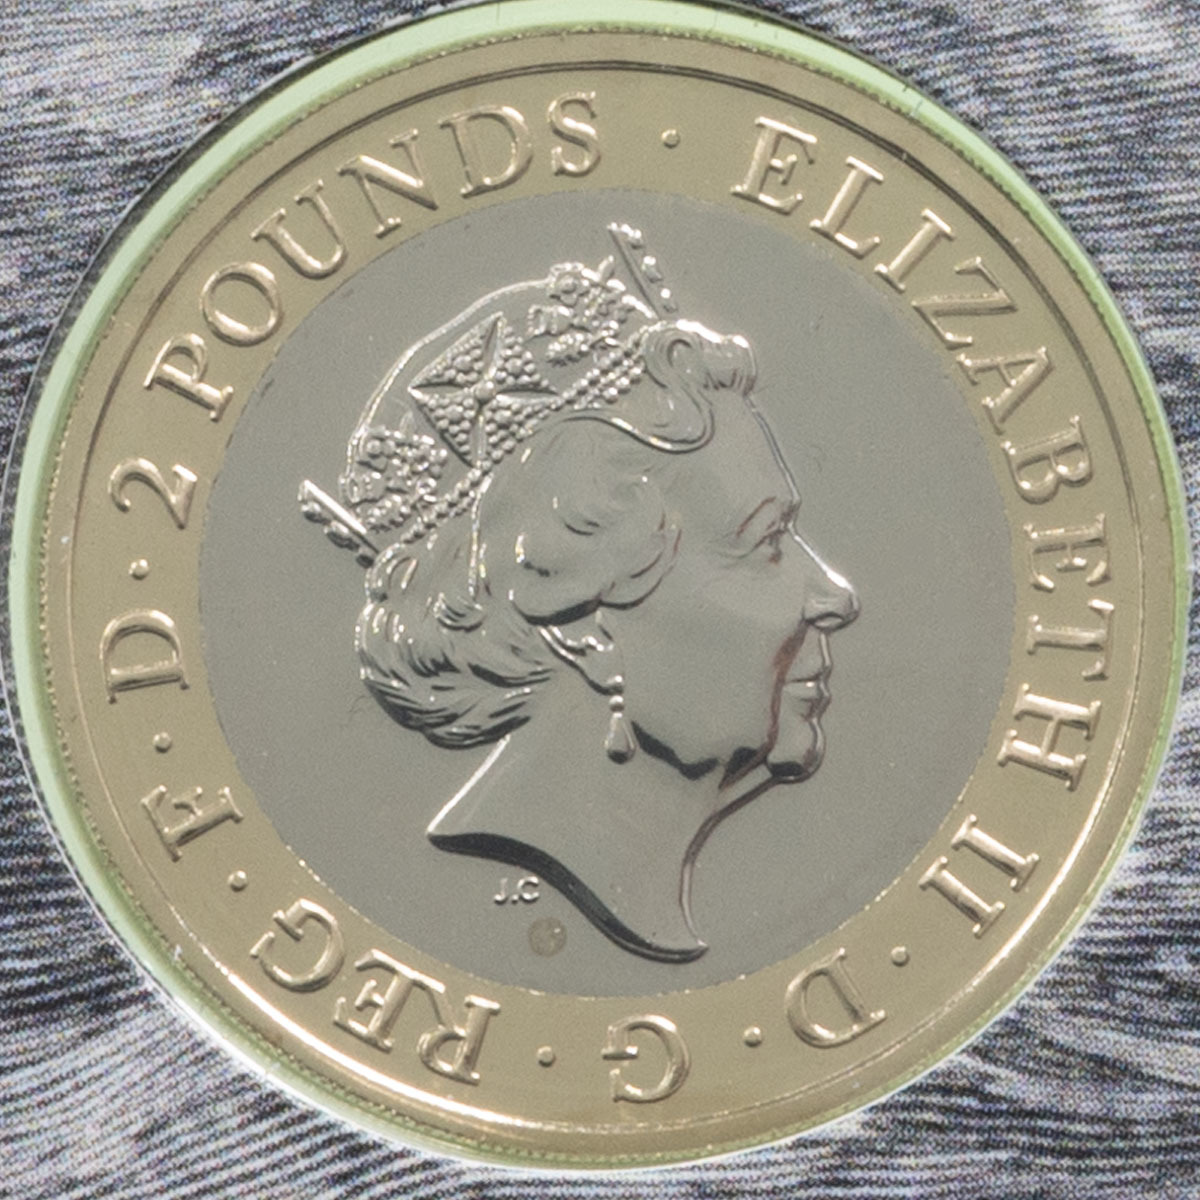 UK20CCBU 2020 Captain Cook 1770 Two Pound Brilliant Uncirculated Coin In Folder Obverse